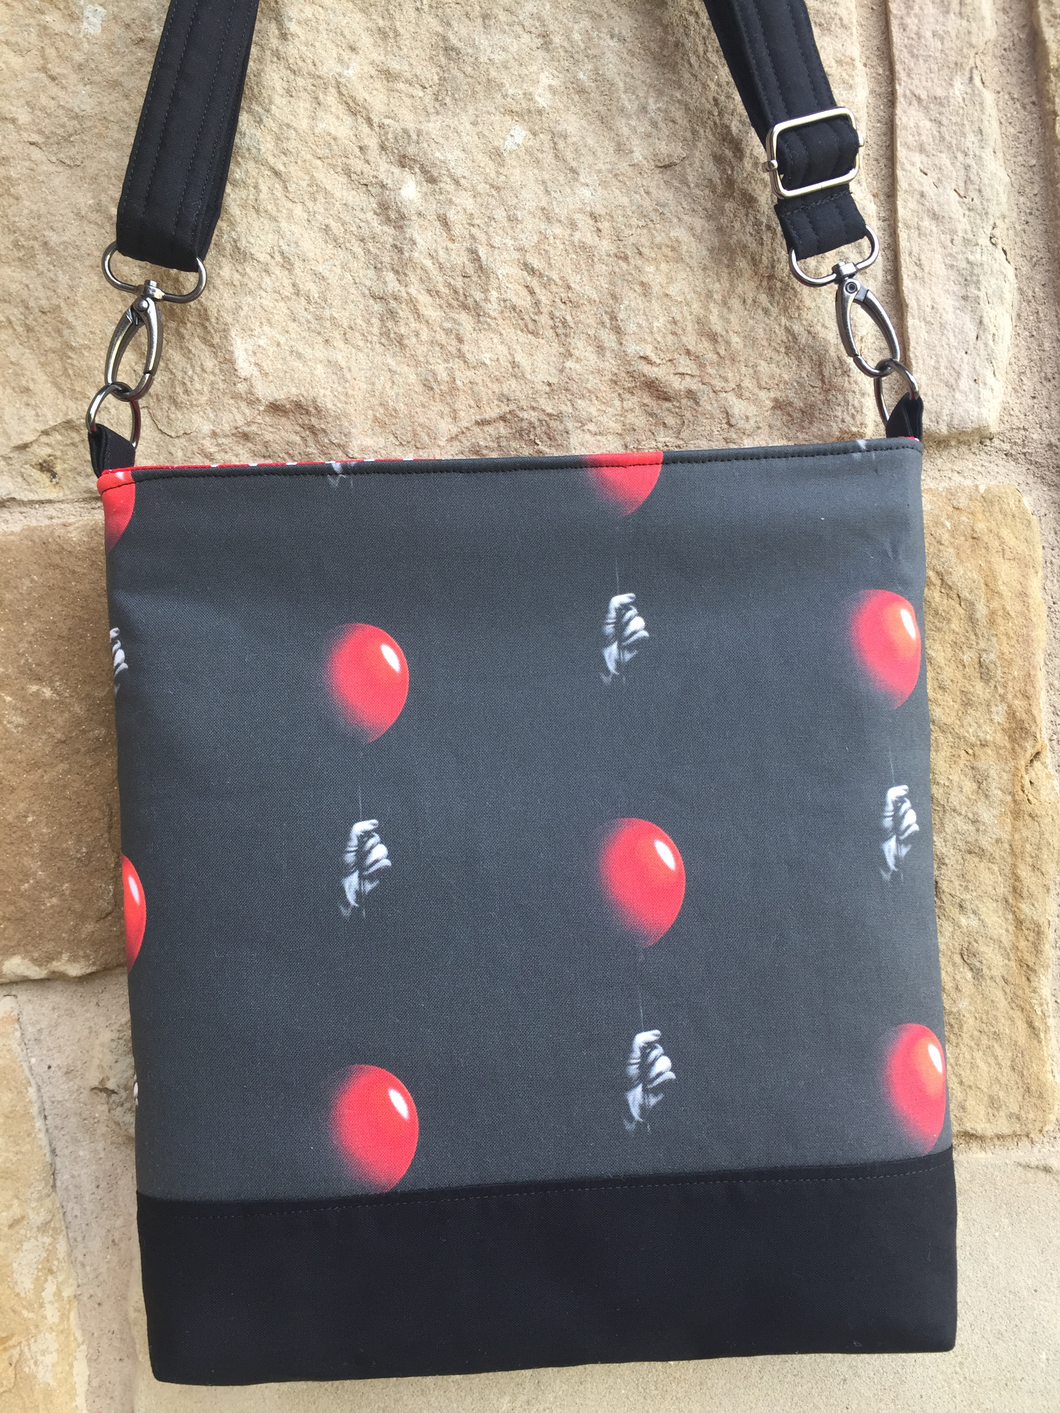 Messenger Bag Made With An Evil Clowns Hand With A Balloon Inspired Fabric - Adjustable Strap - Zippered Closure - Zippered Pocket - Cross Body Bag